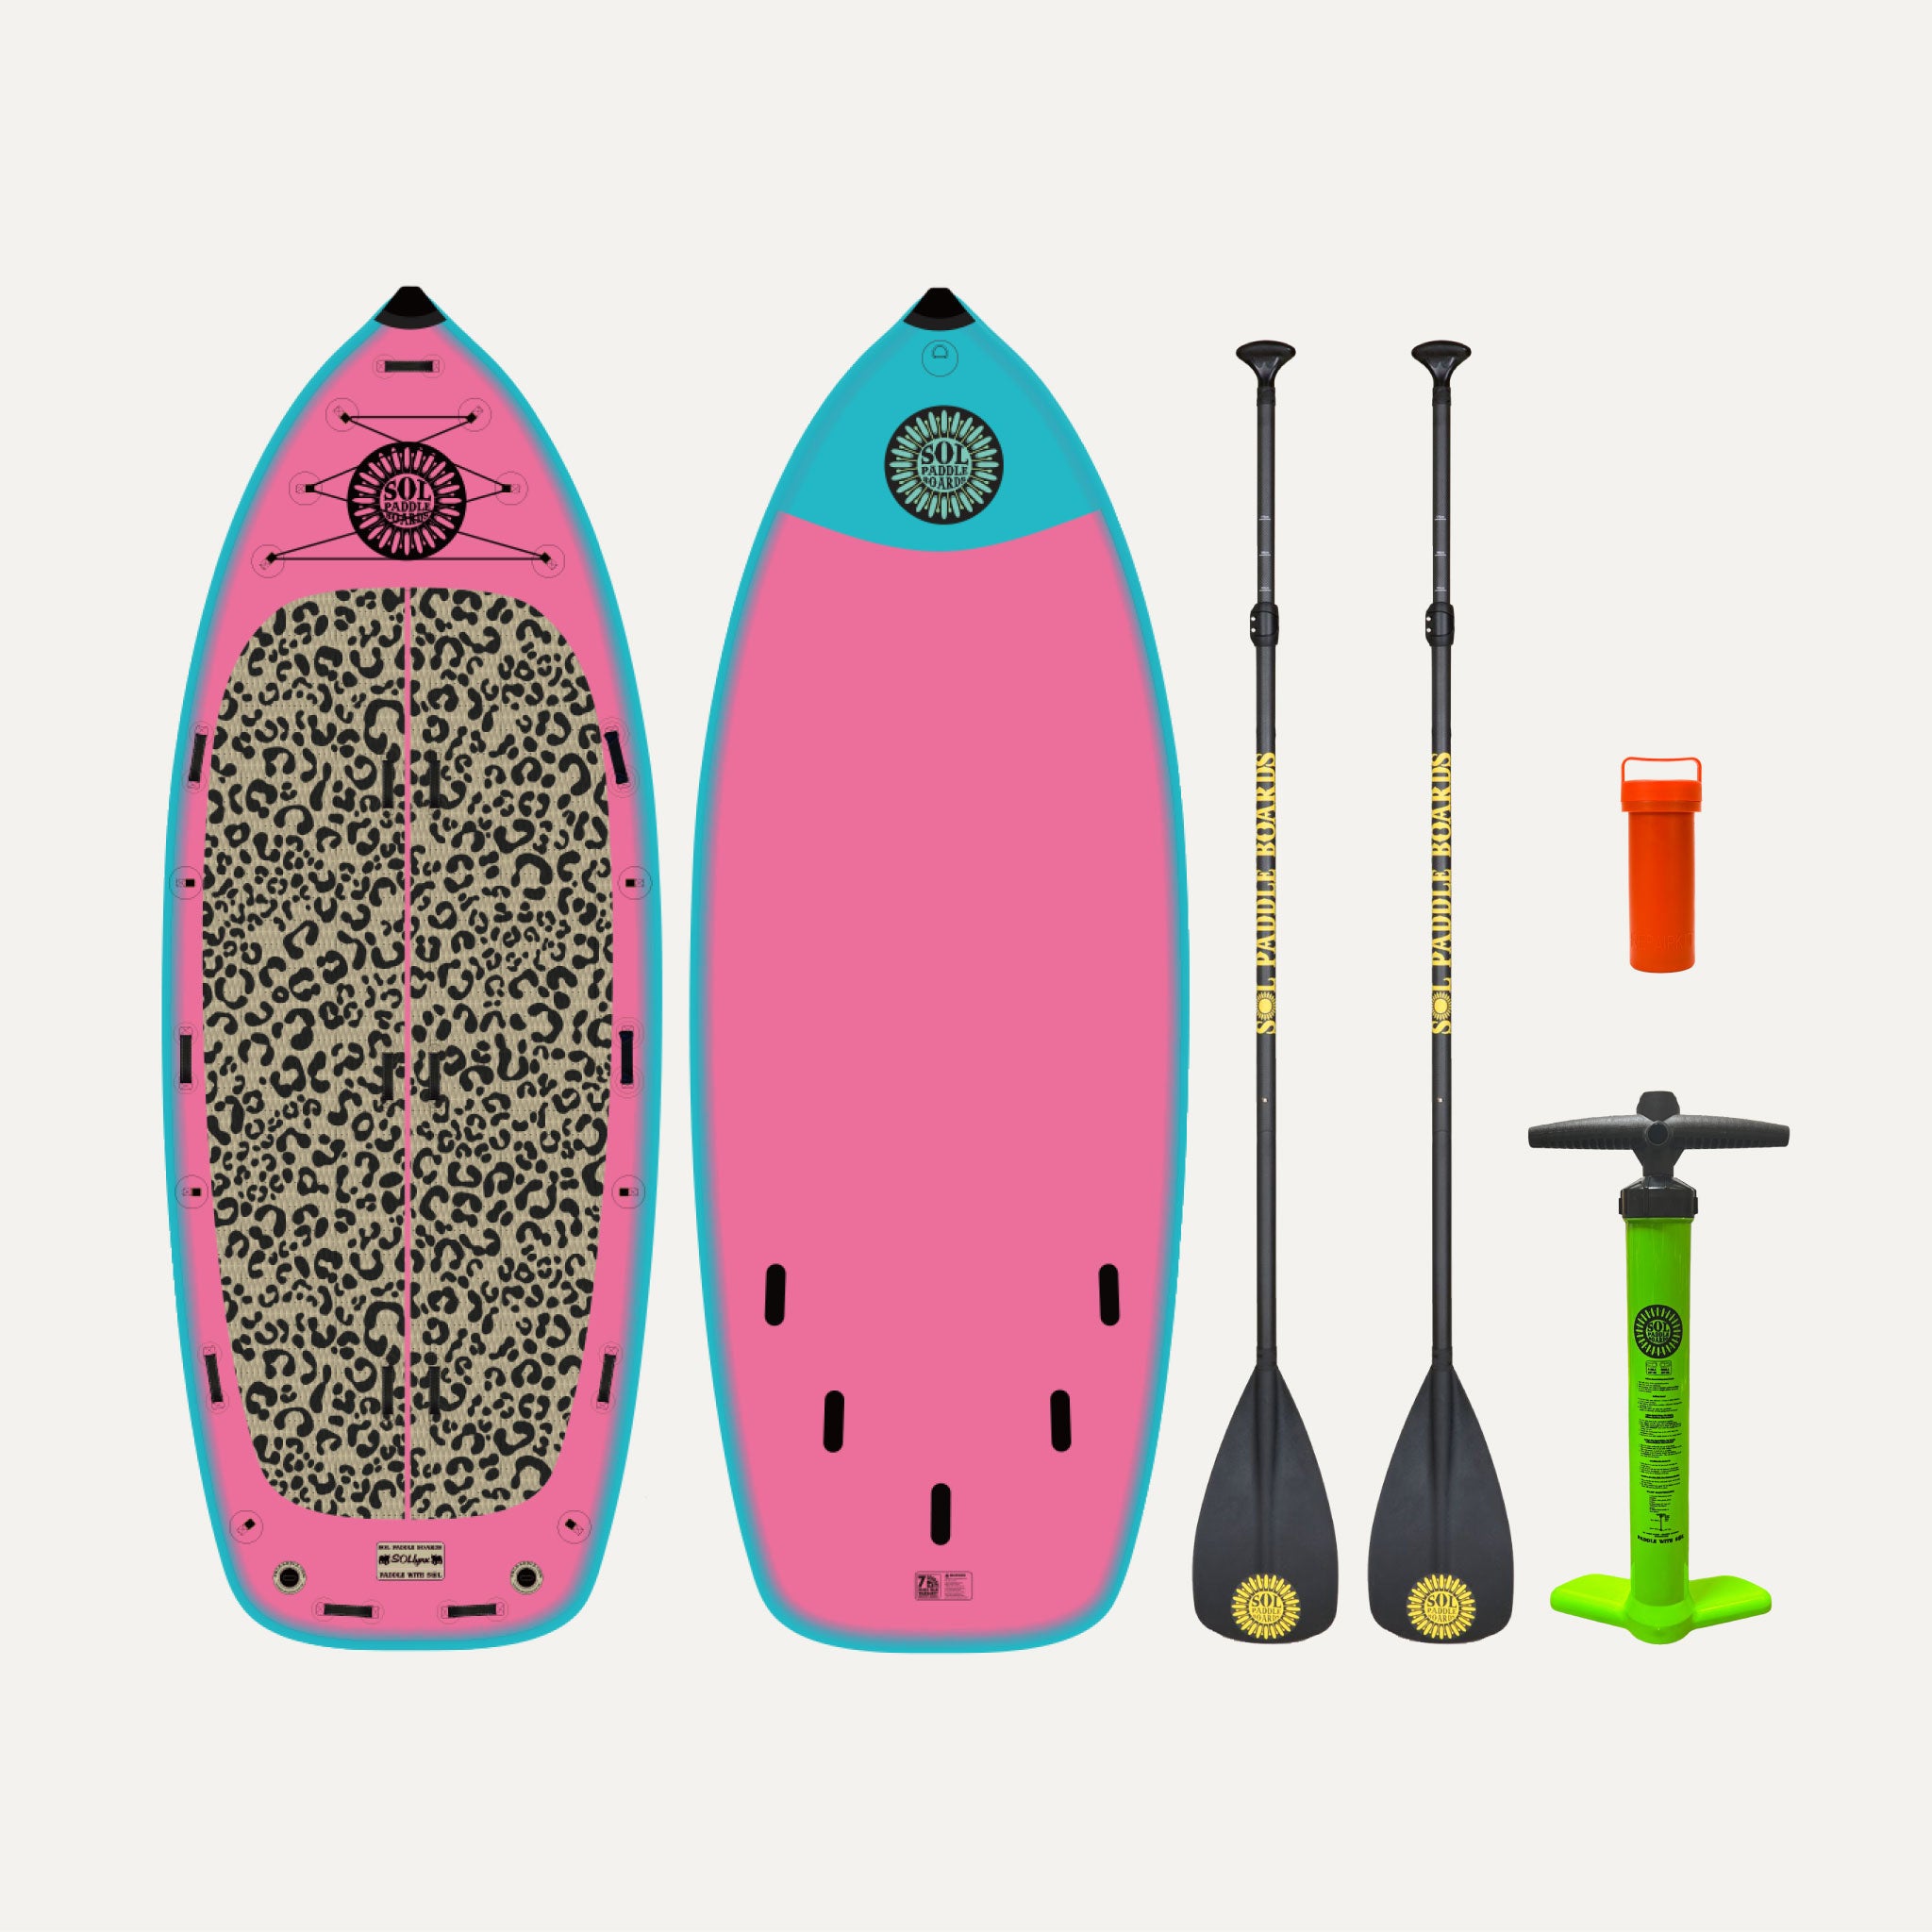 Classic SOLfiesta Limited-Edition Lynx Inflatable Paddle Board showcasing the top and bottom views of the SUP board and the accessories that come with it